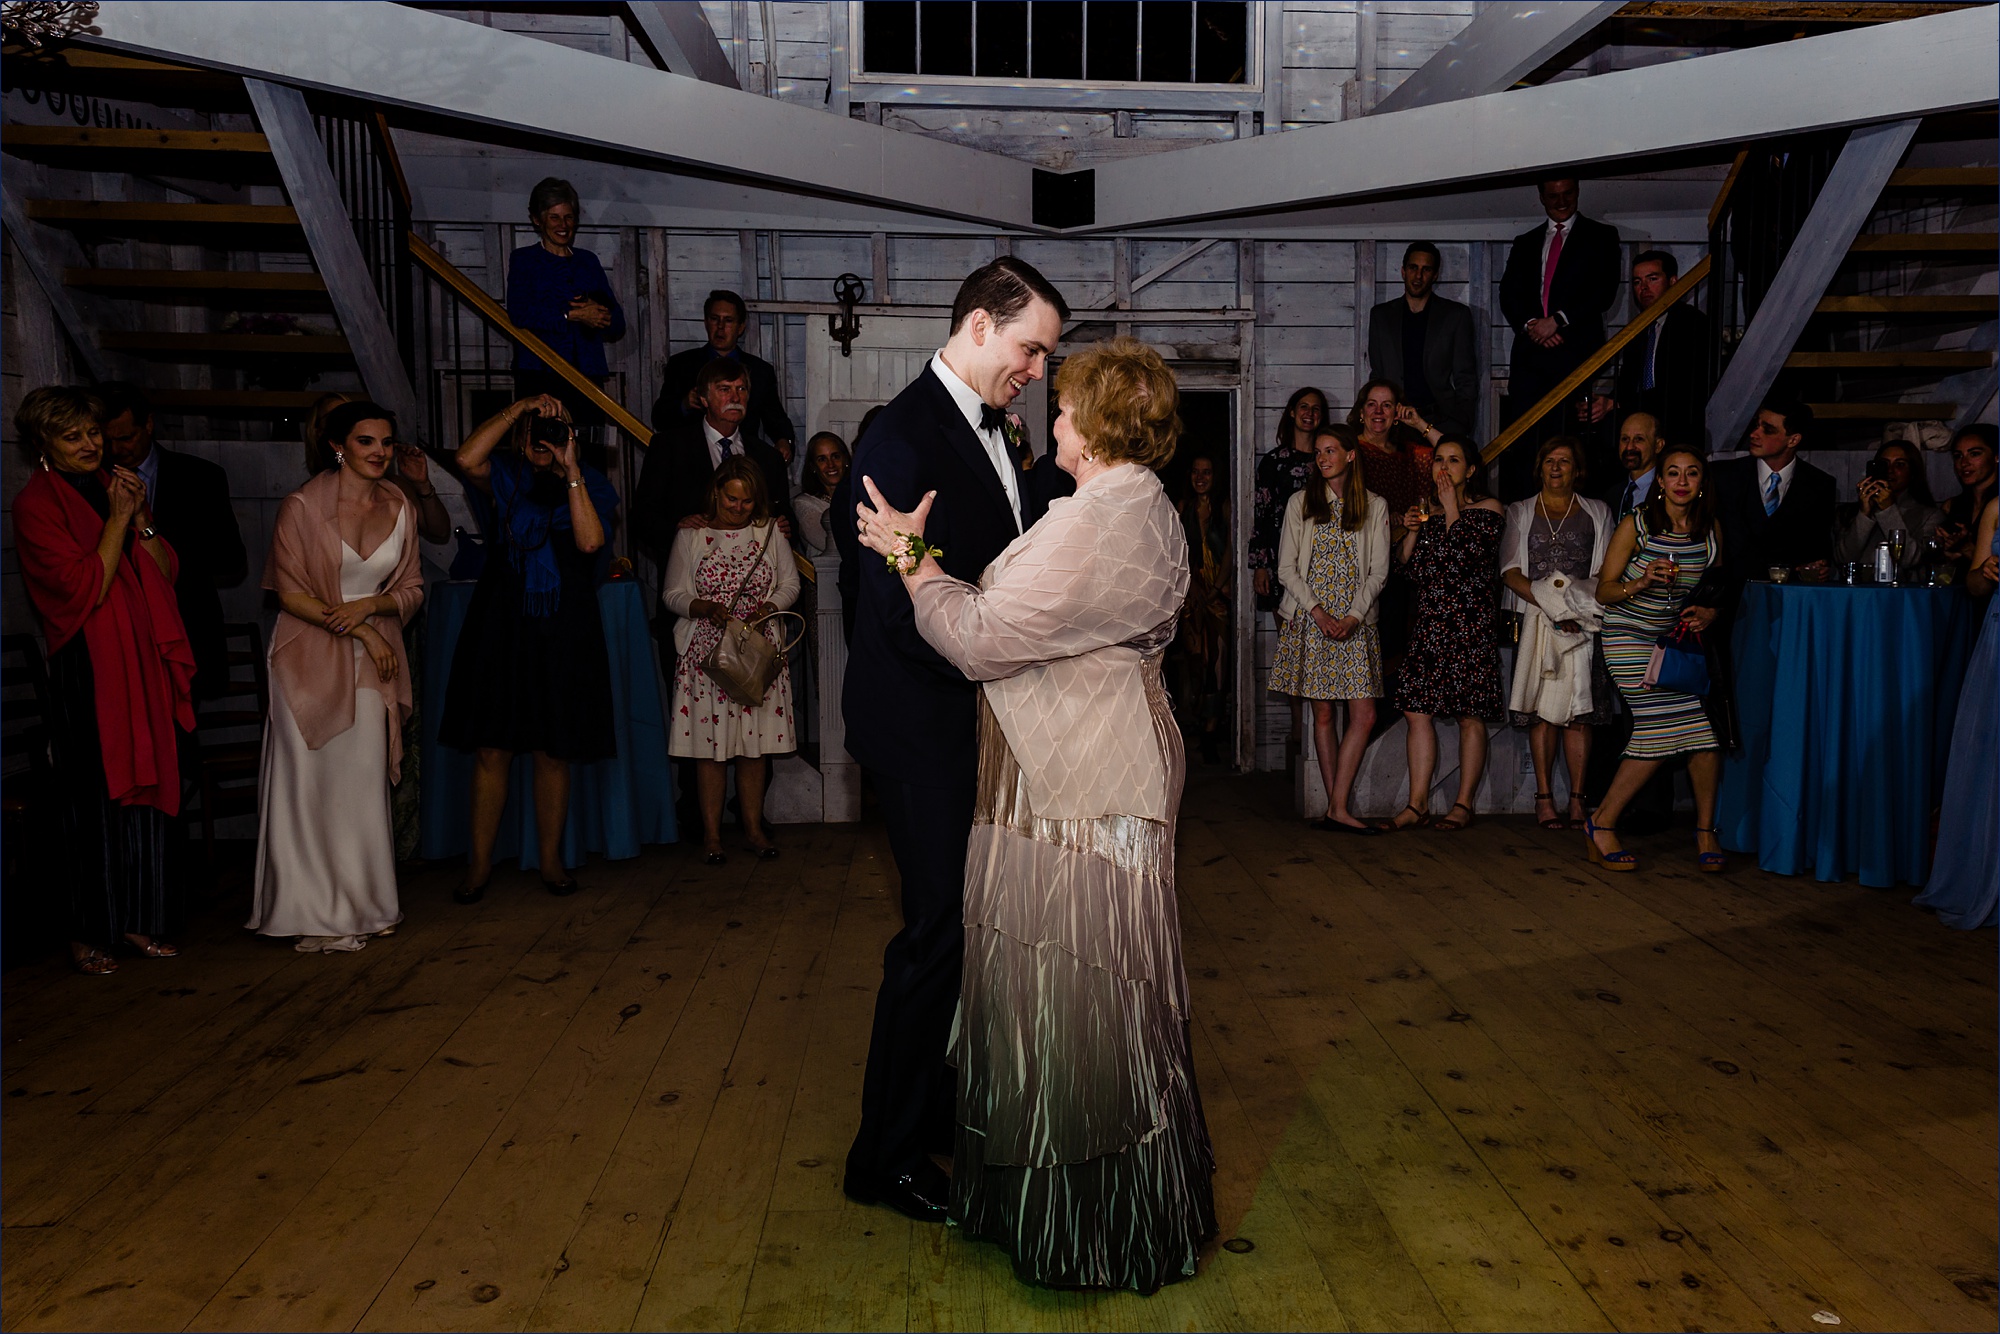 The groom and his mother dance in the barn at his Maine wedding